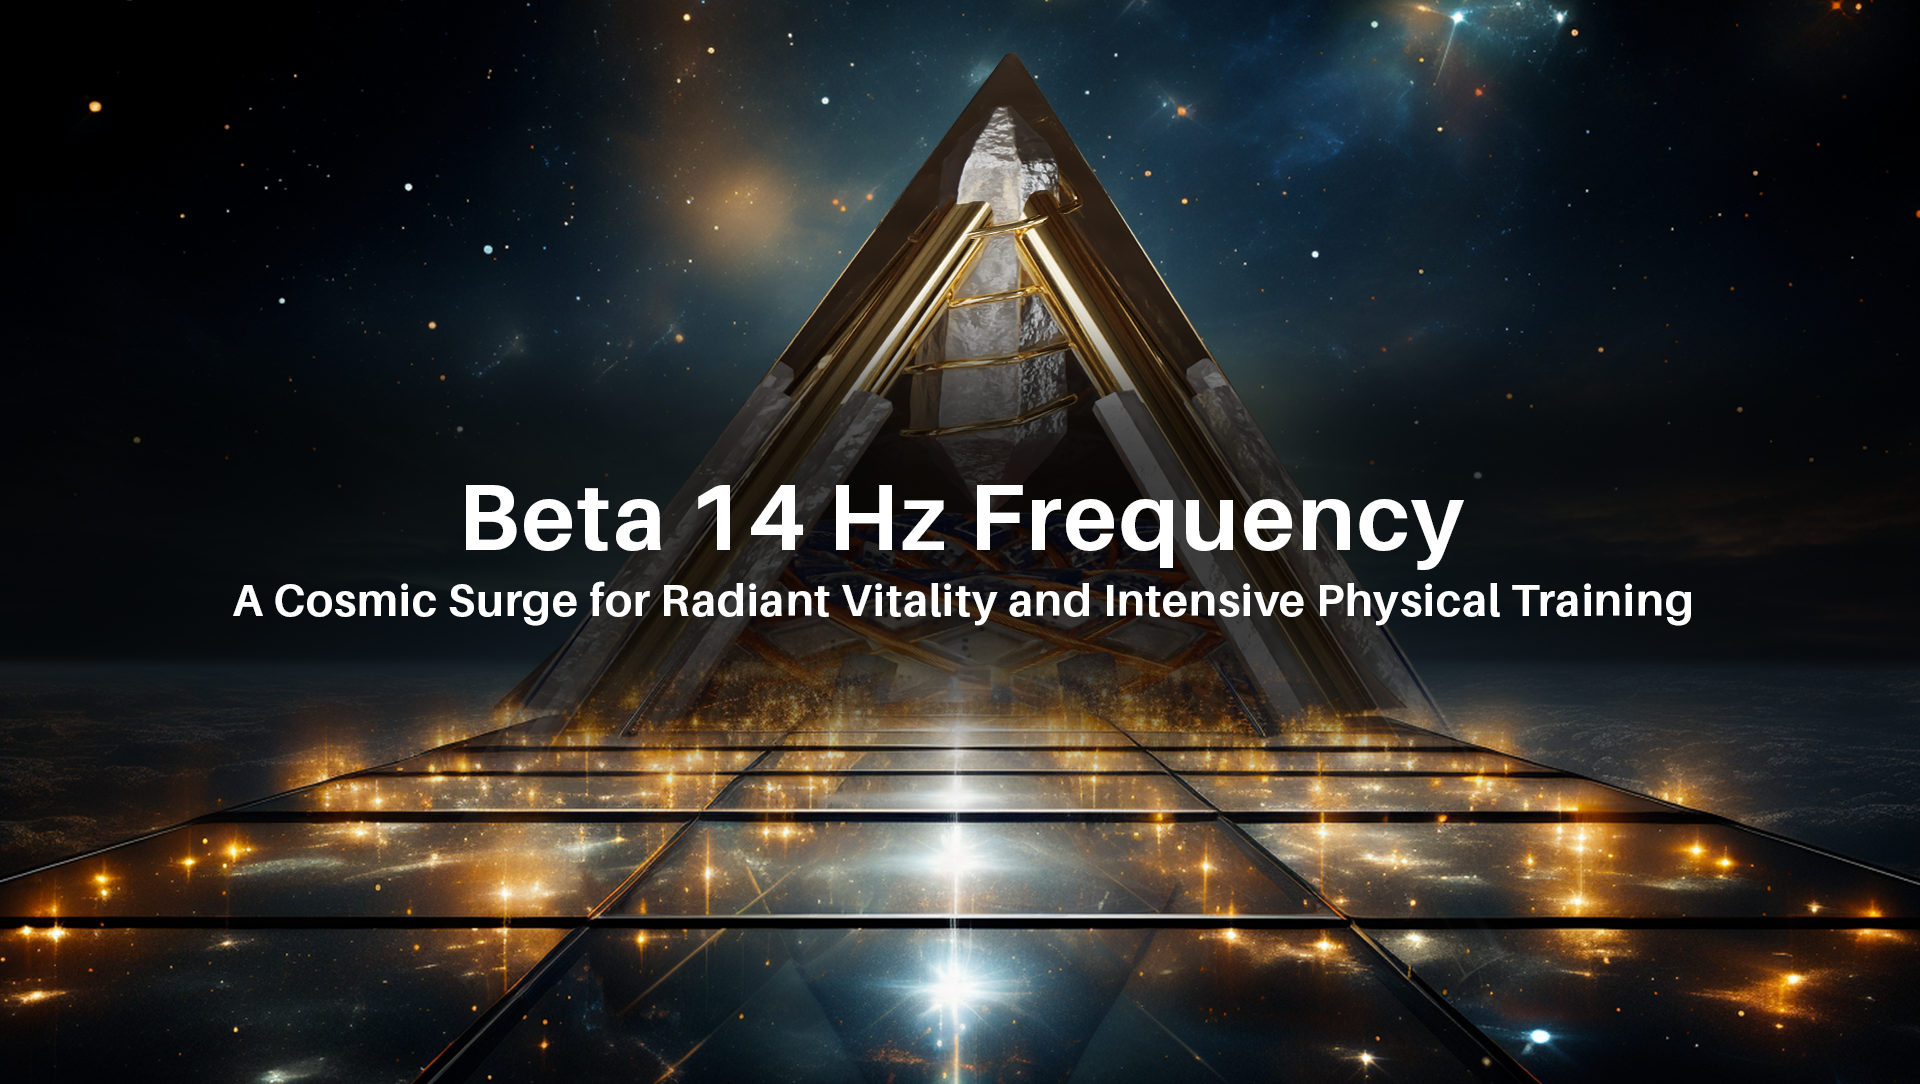 Beta 14 Hz Frequency – A Cosmic Surge for Radiant Vitality and Intensive Physical Training